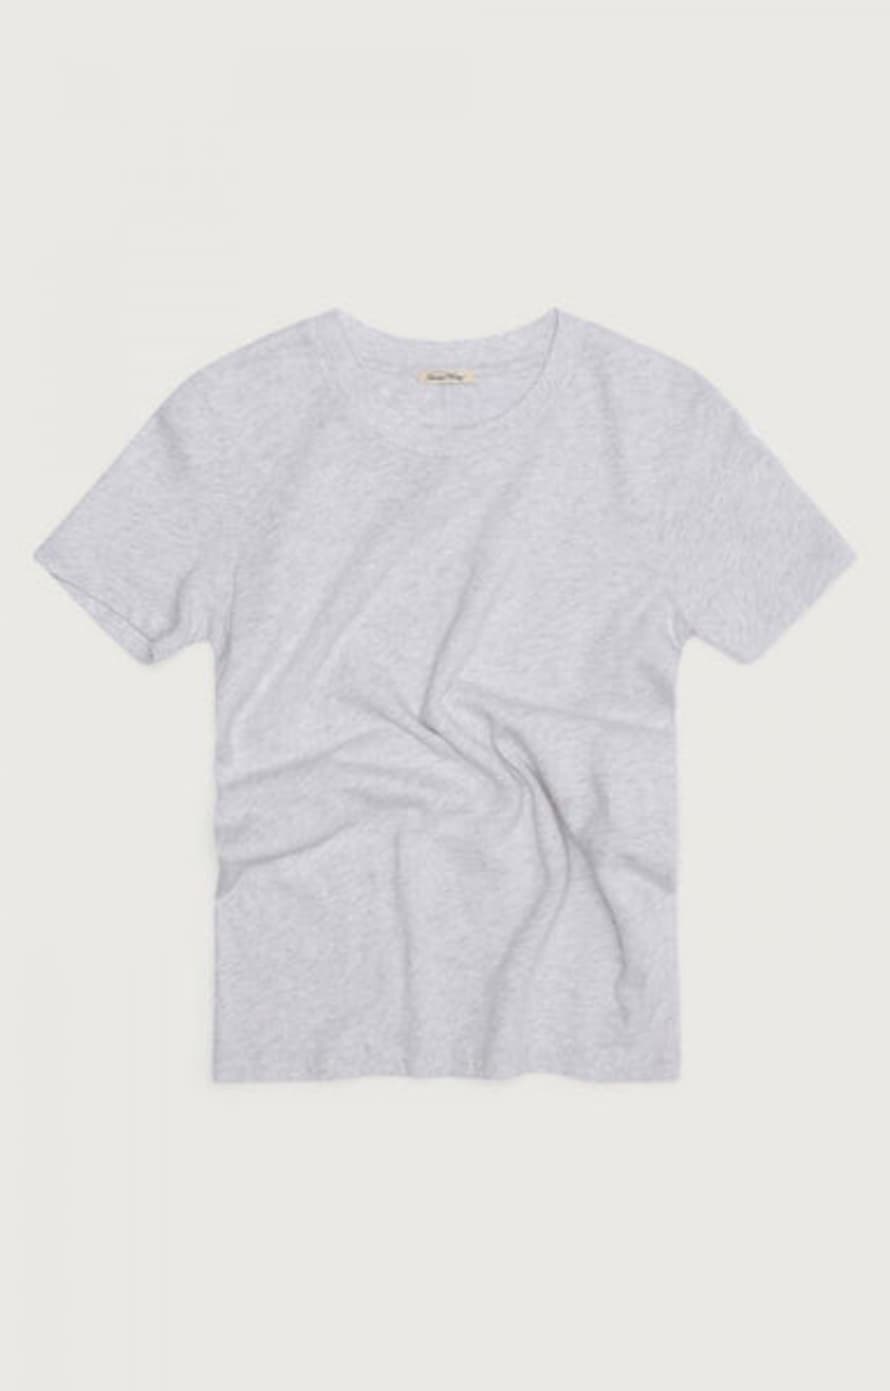 American Vintage Sonoma Fitted T-Shirt - Arctic Grey